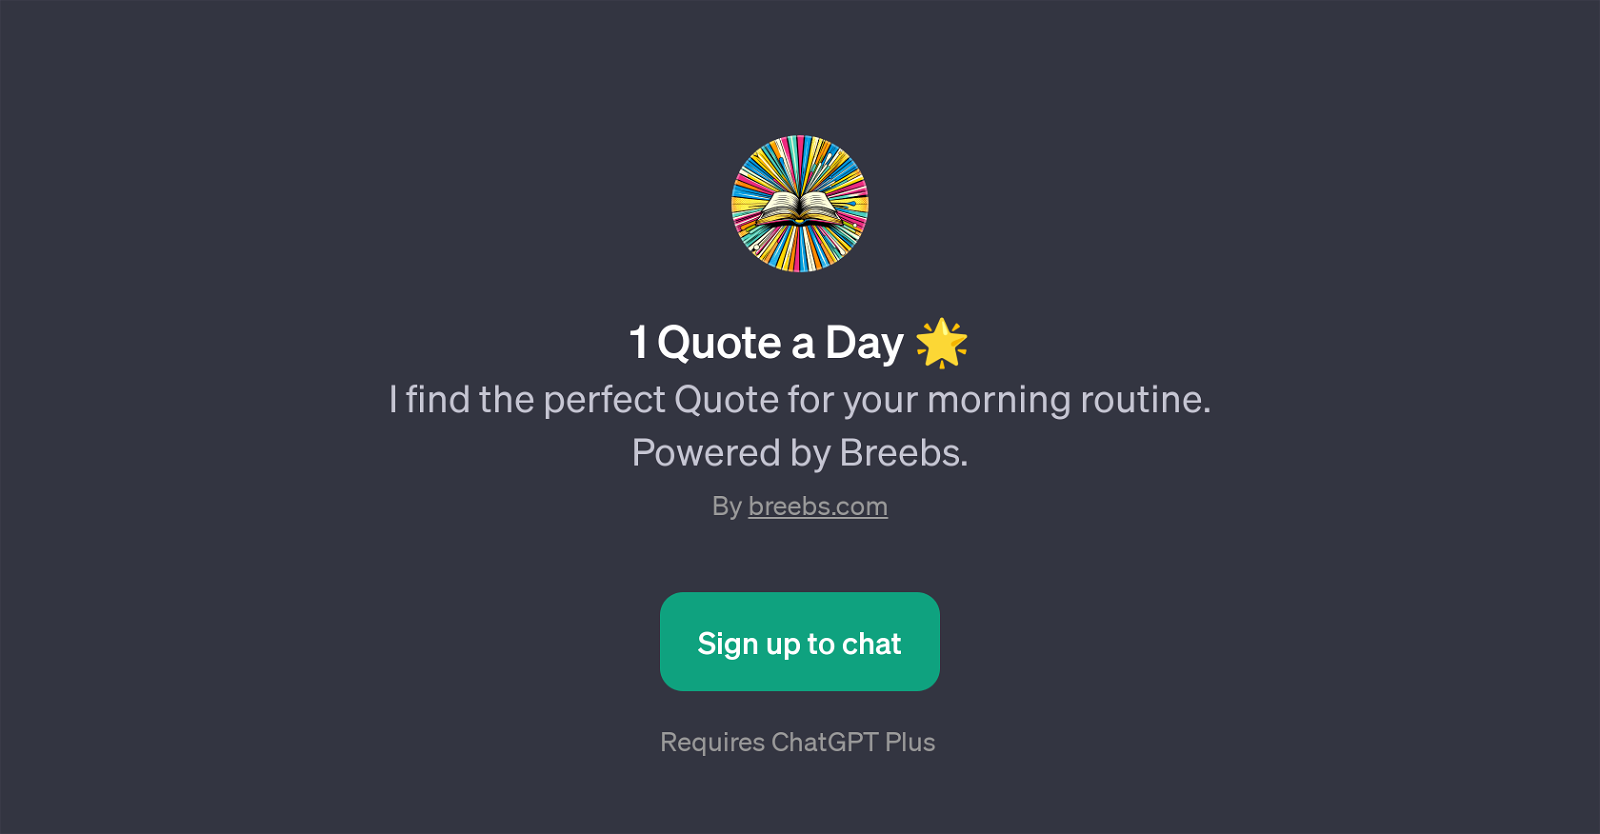 1 Quote a Day website